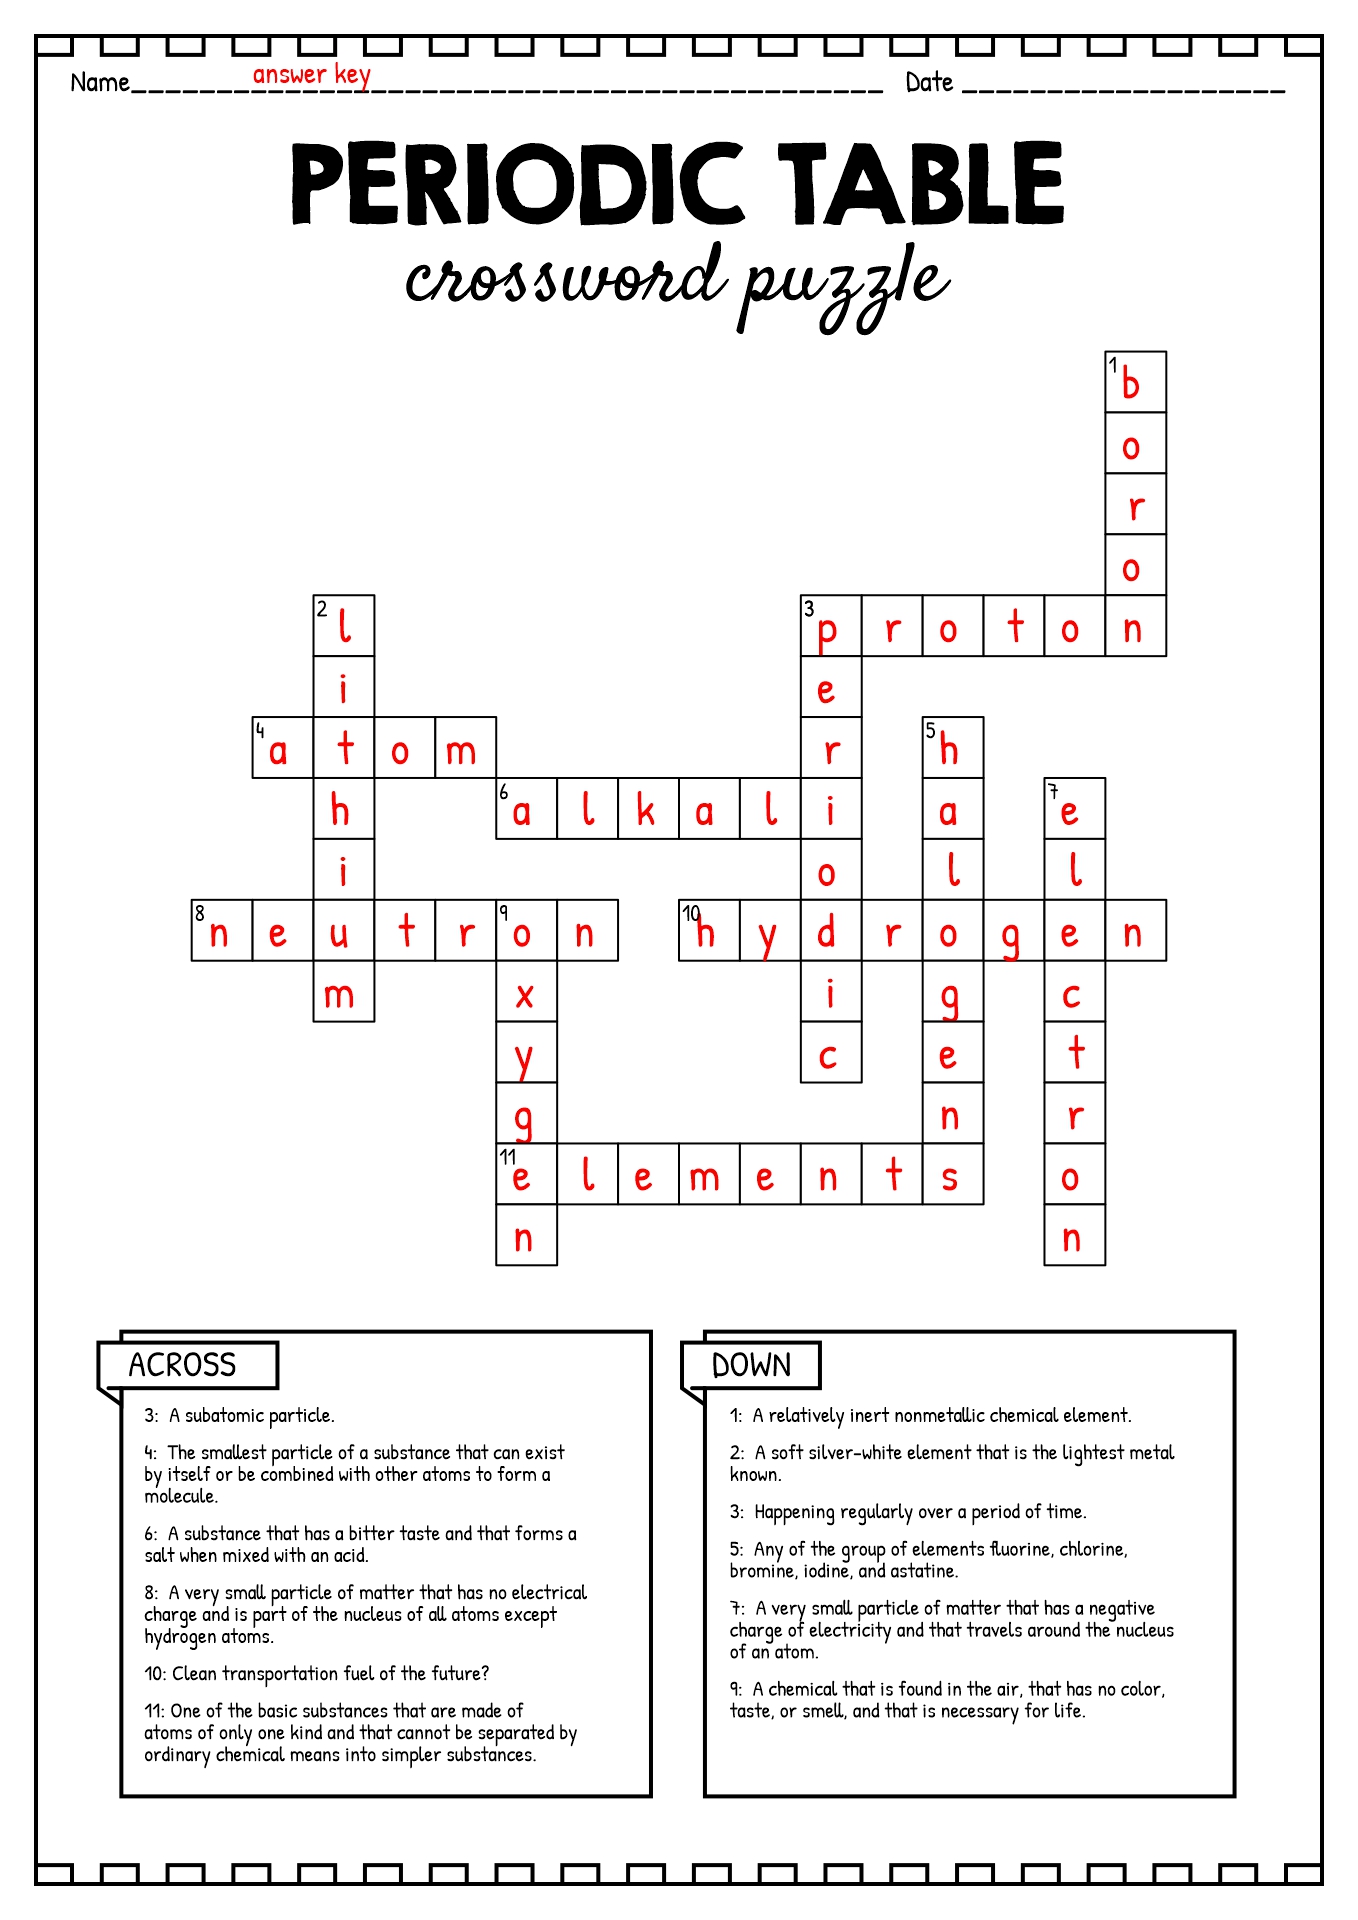 Periodic Table Crossword Puzzle Answers